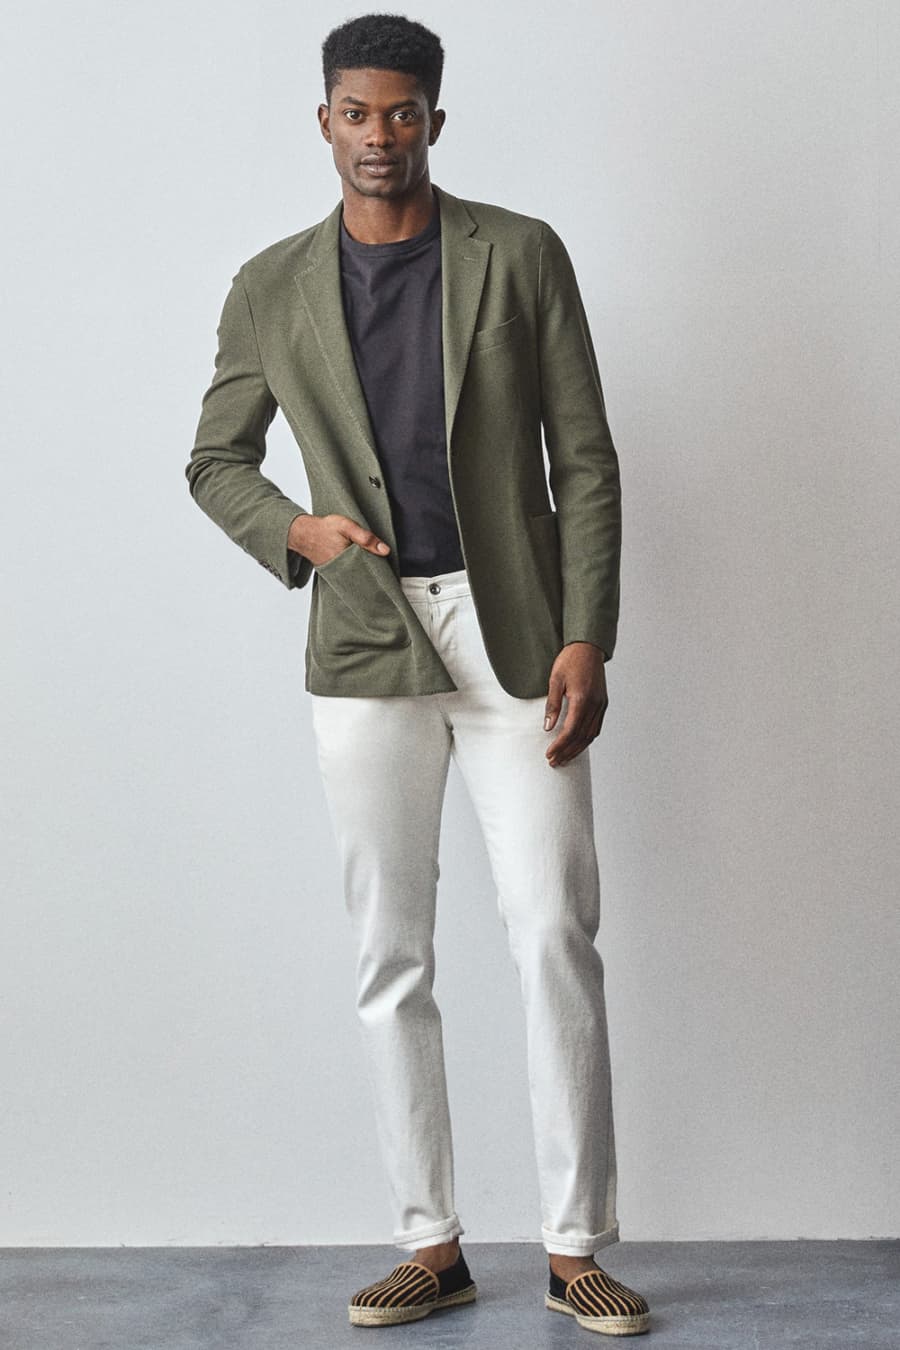 Men's white jeans, T-shirt, knitted green blazer and espadrilles outfit